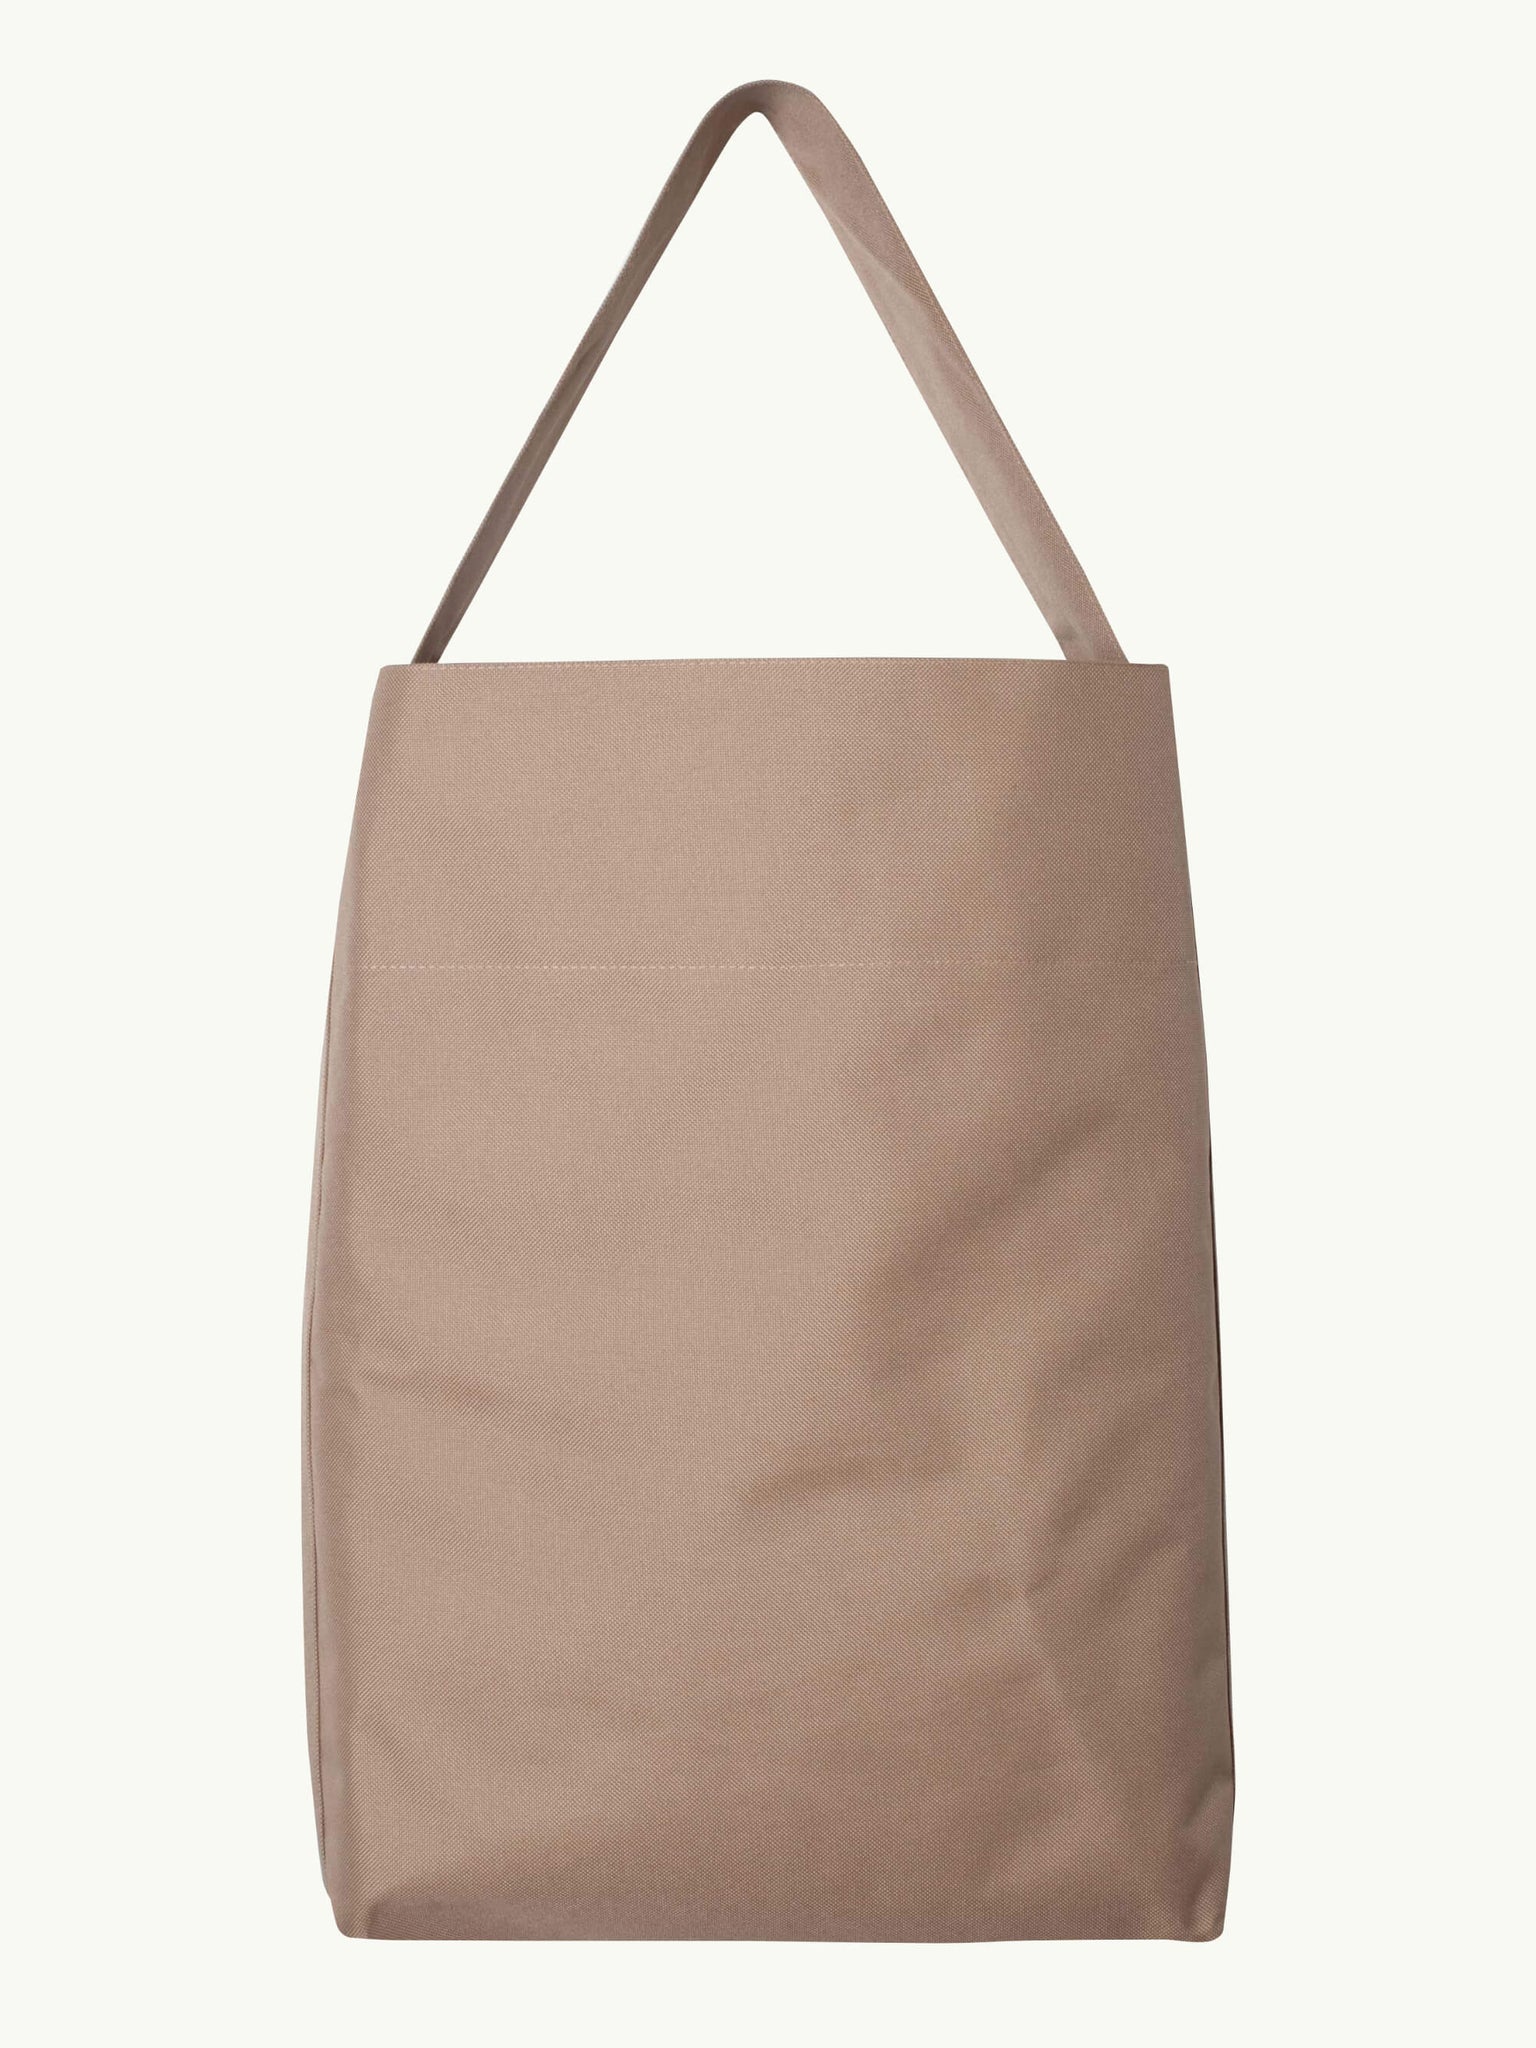 Bucket Tote in Sand